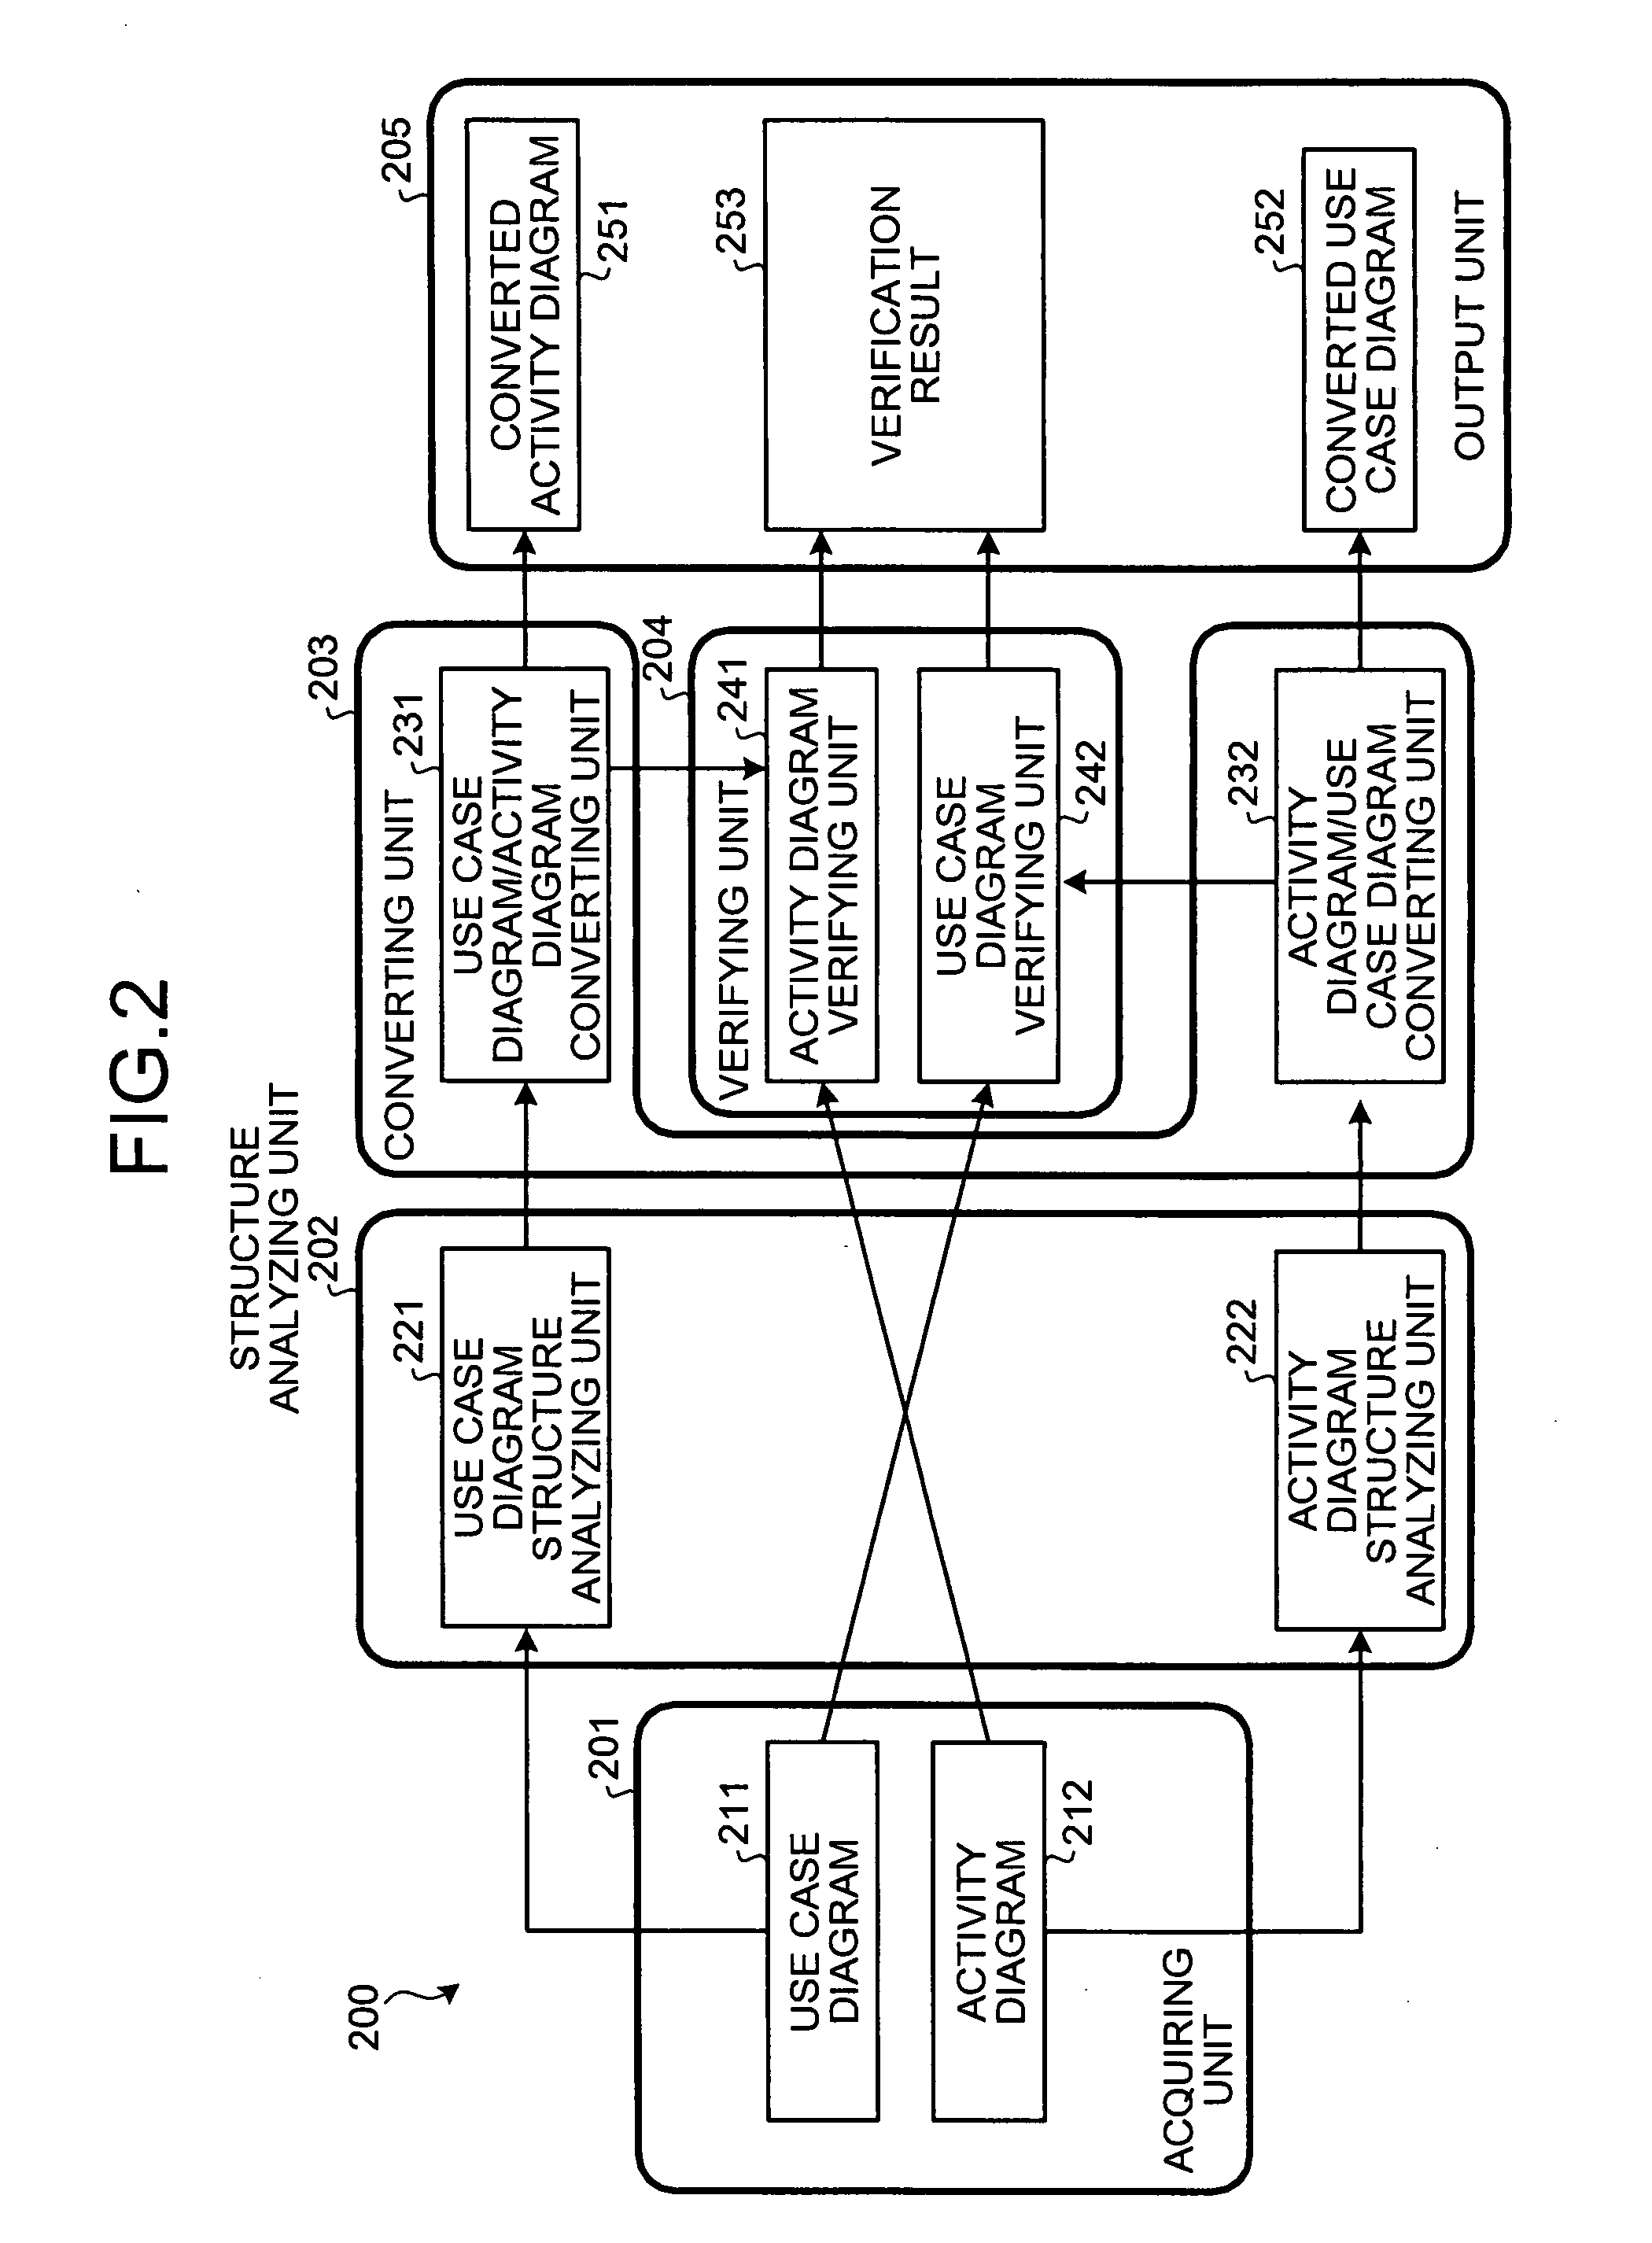 Computer product for supporting design and verification of integrated circuit